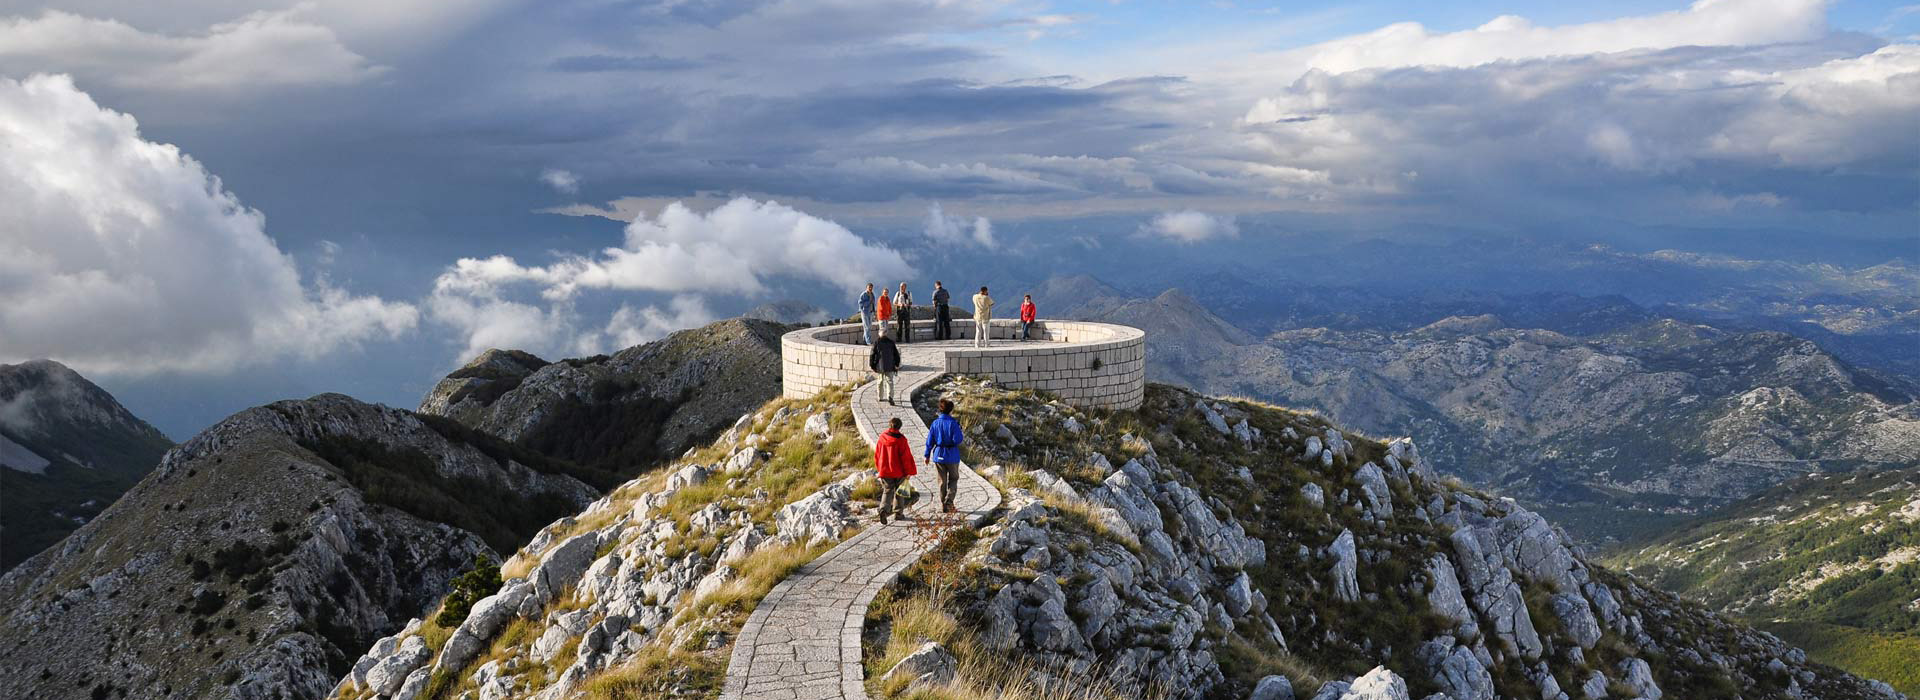 Walking and cultural Balkans discovery trip - Lovcen mountain